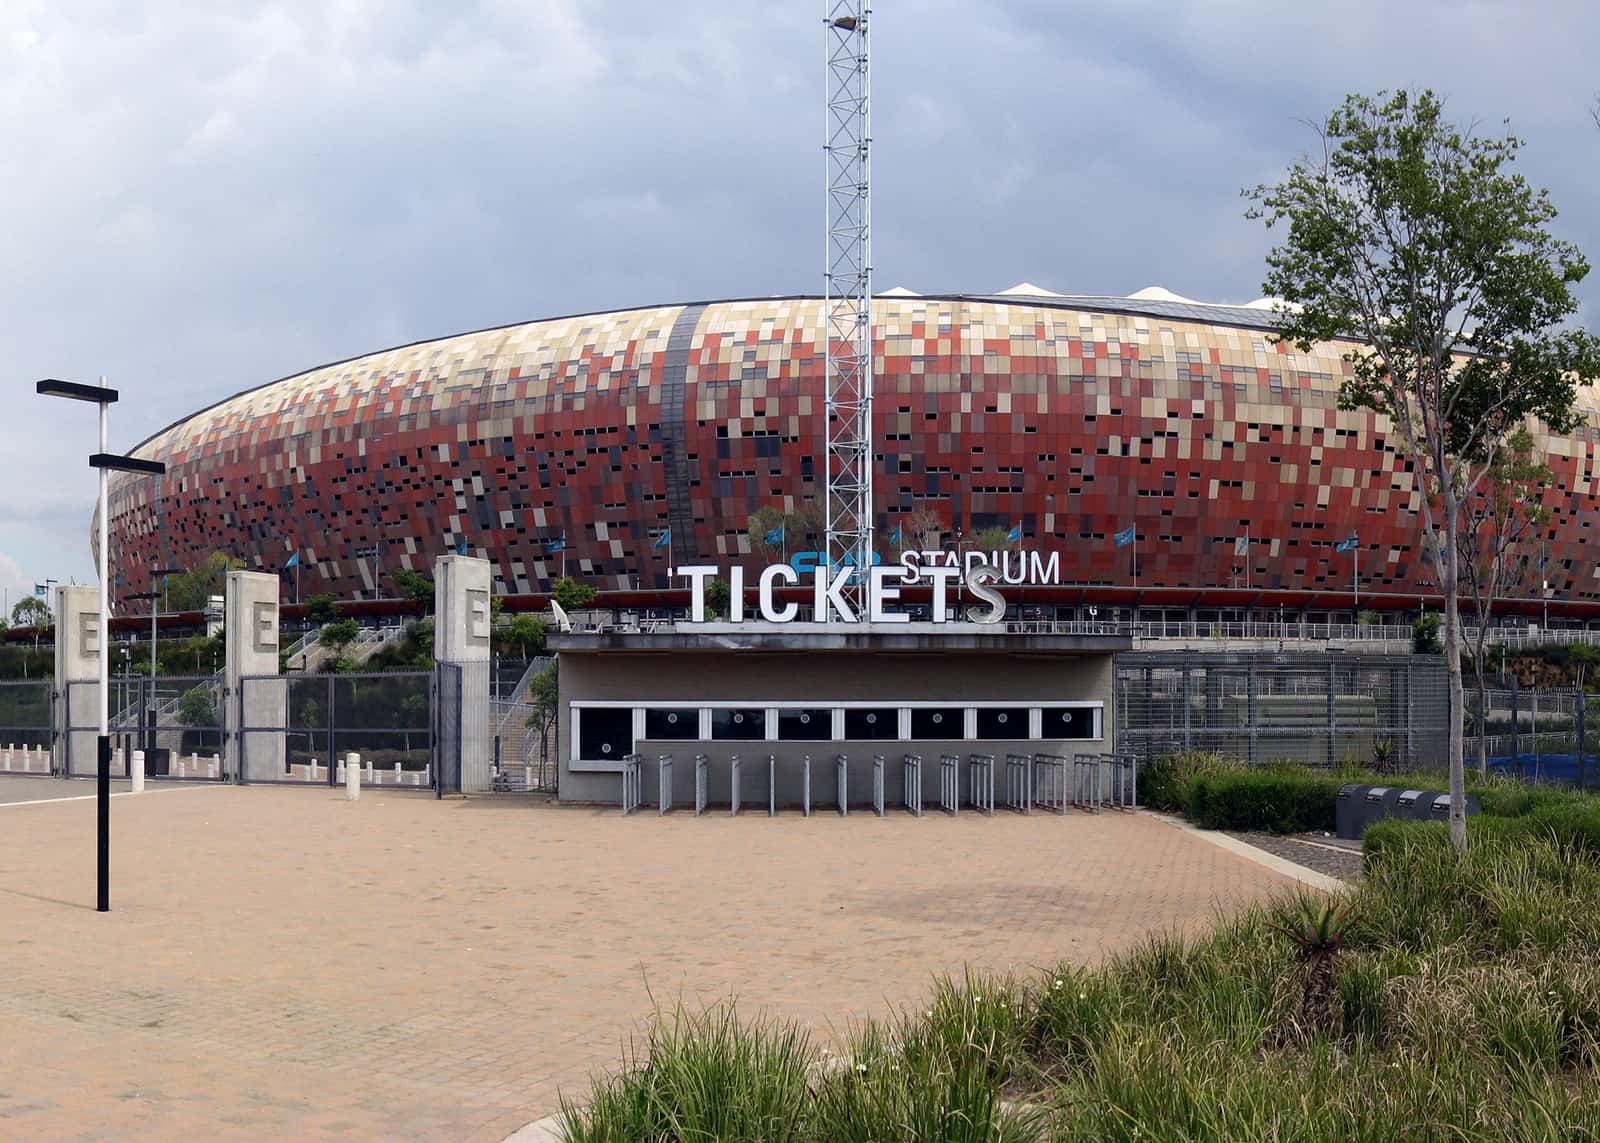 FNB Stadium “The Calabash”: South Africa’s Colossal Venue with a Historic Legacy